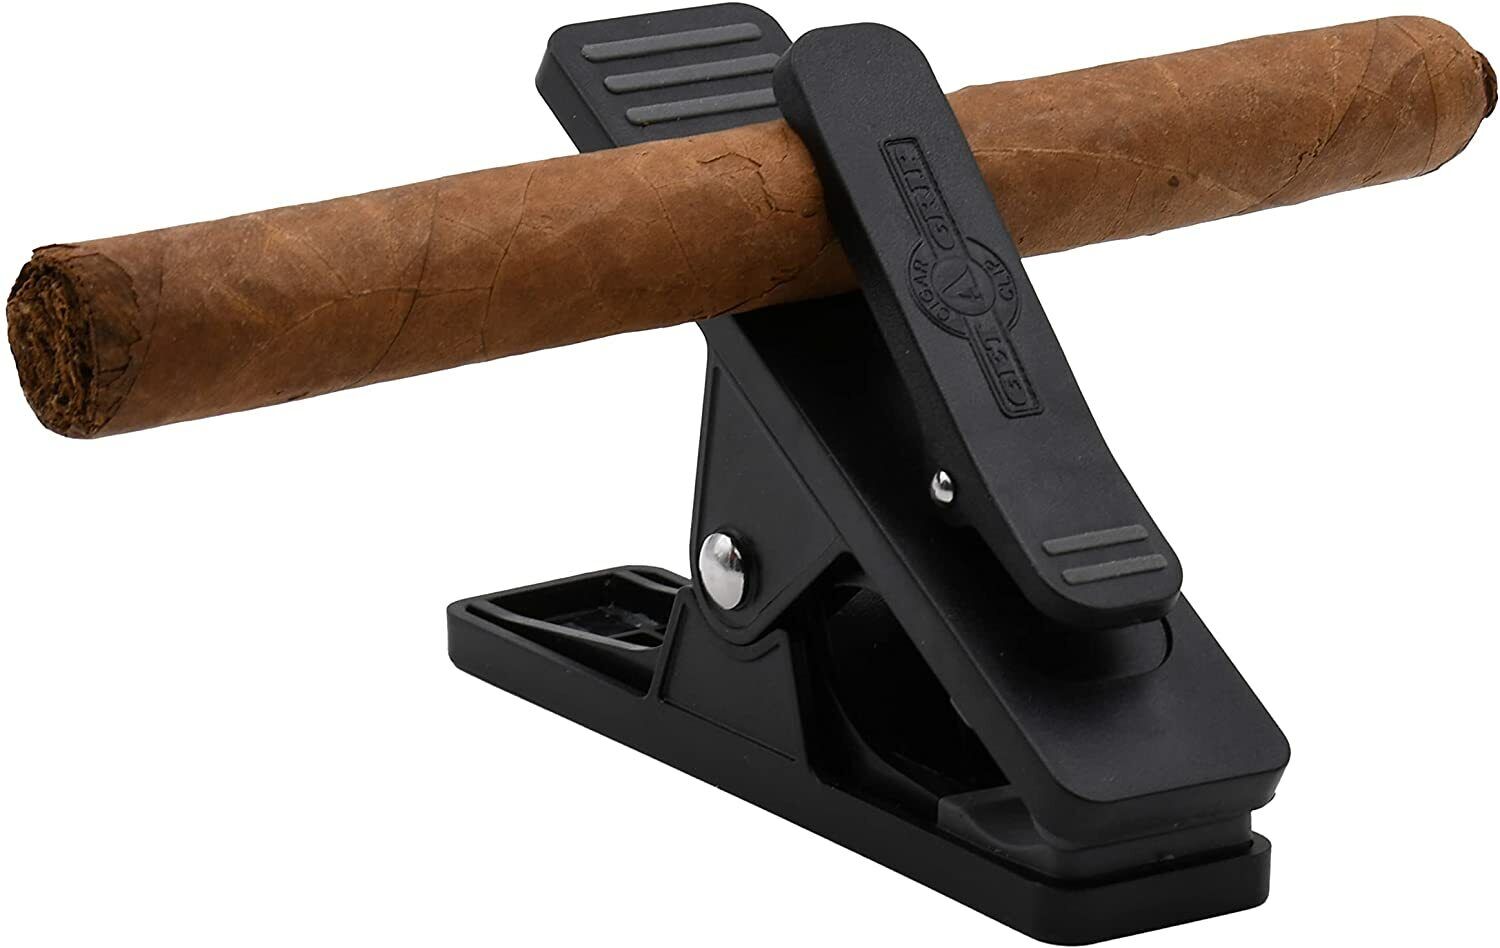 Get A Grip Cigar Clip Attaches Cigars to Golf Carts, Boats, RV's, BBQ Grills